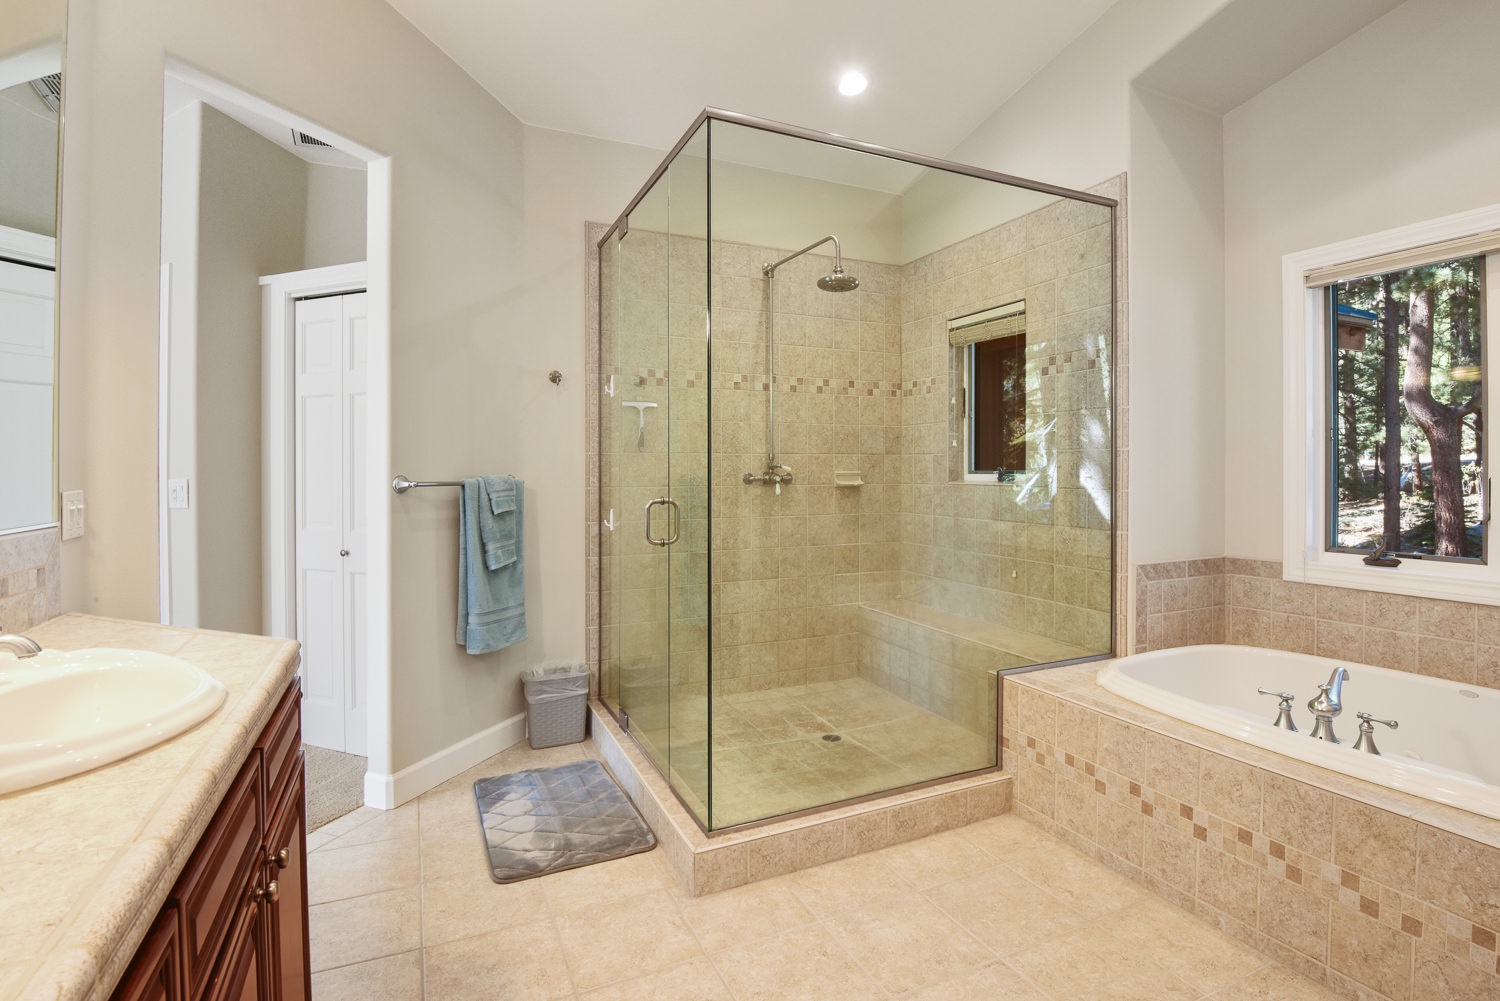 Bathroom 3 private en-suite with separate soaking tub, and stand up shower